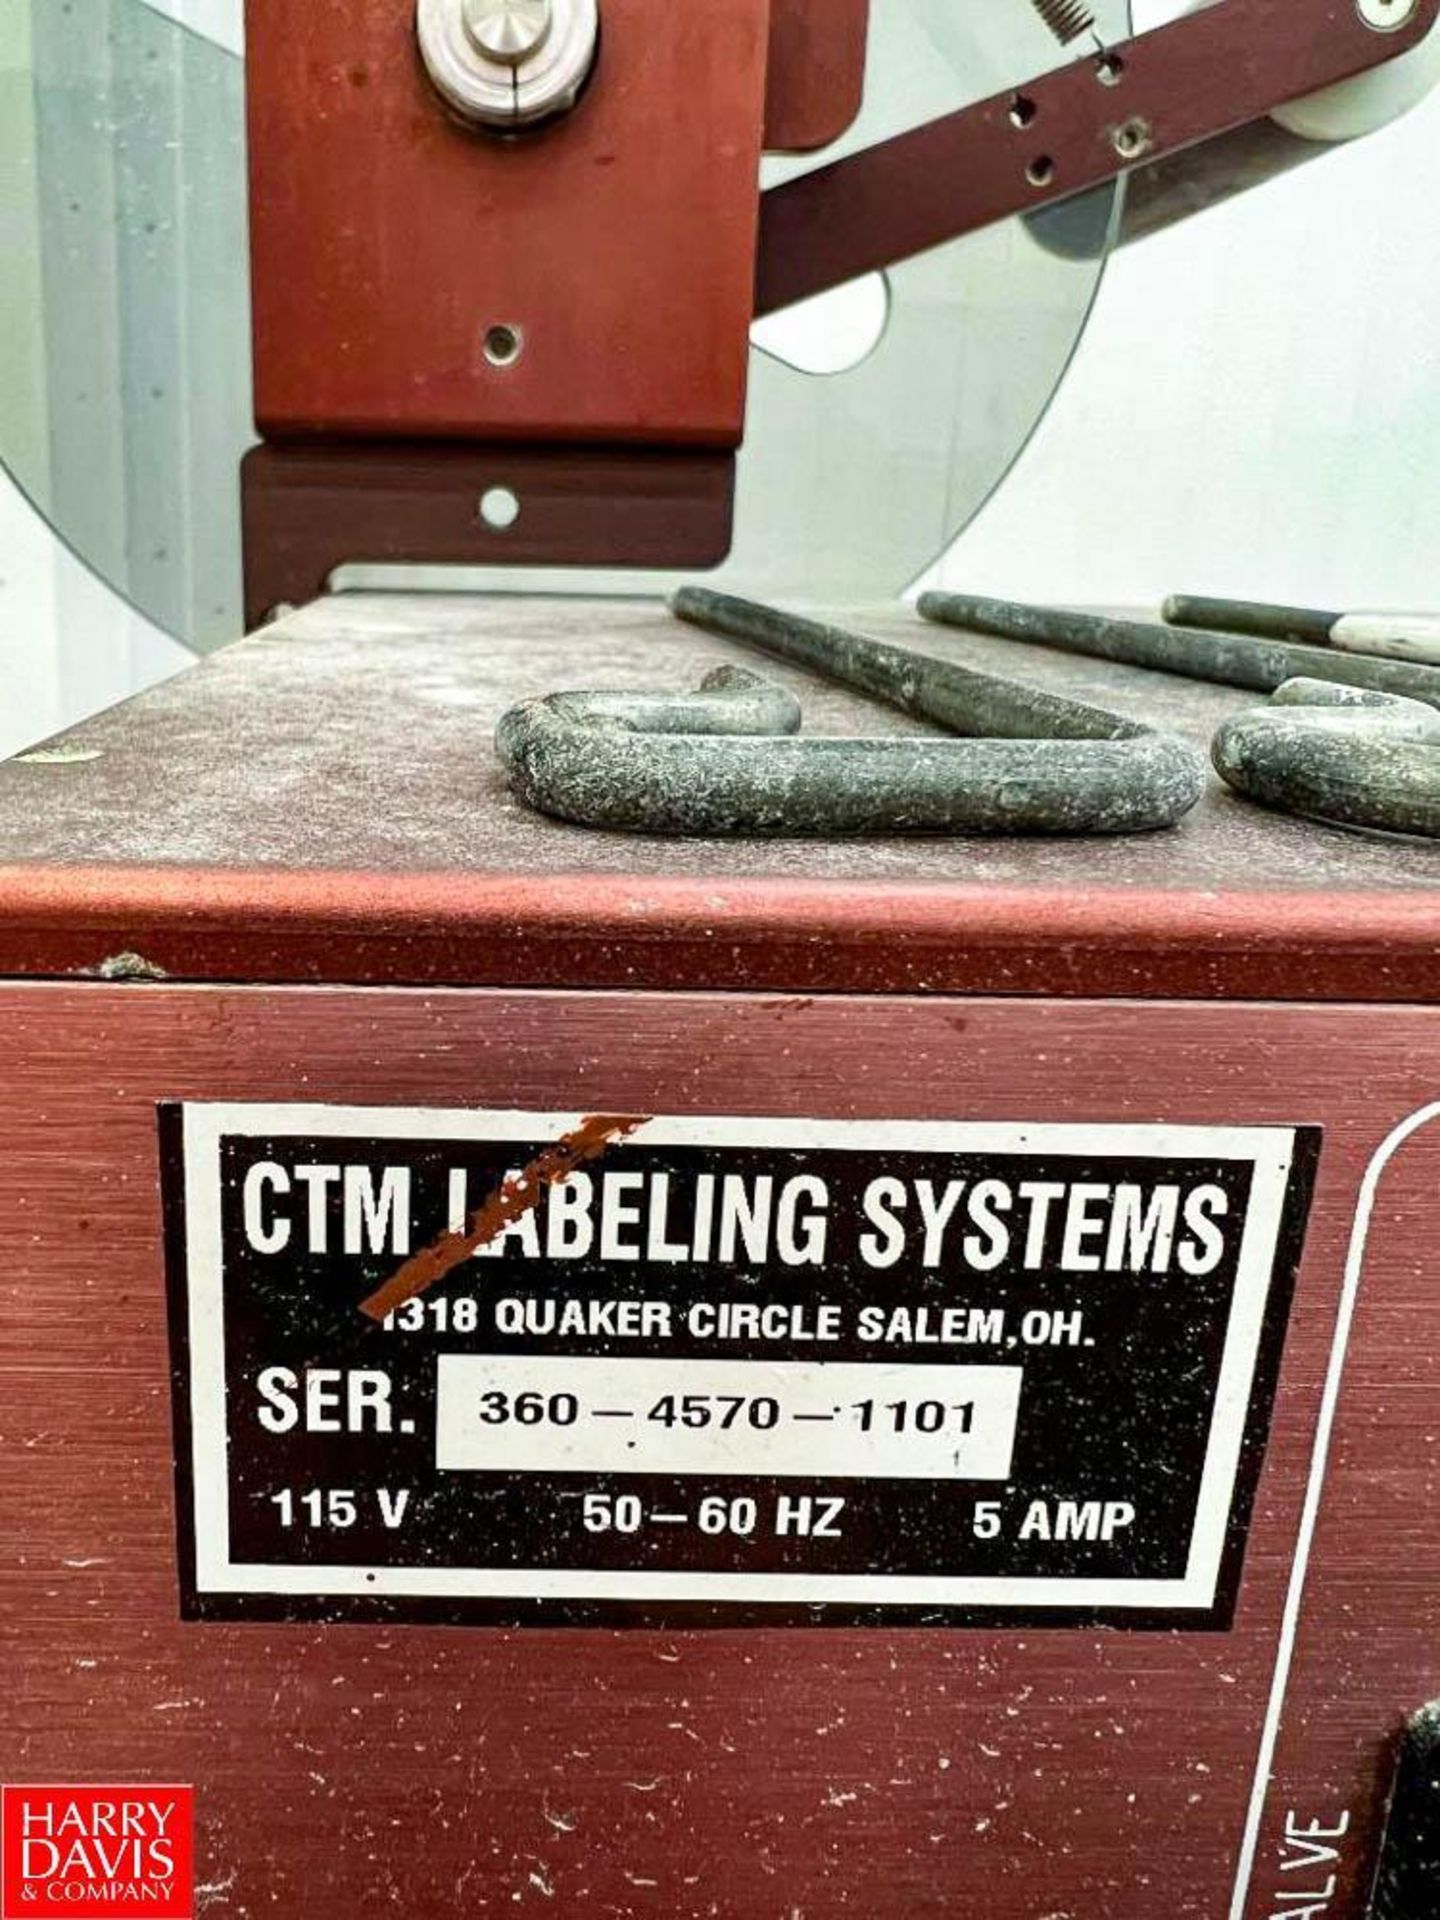 CTM Labeling Systems Mobile Top/Bottom Labeler, S/Ns: 360-4570-1101 (Top) and 360-4571-1101 (Bottom)